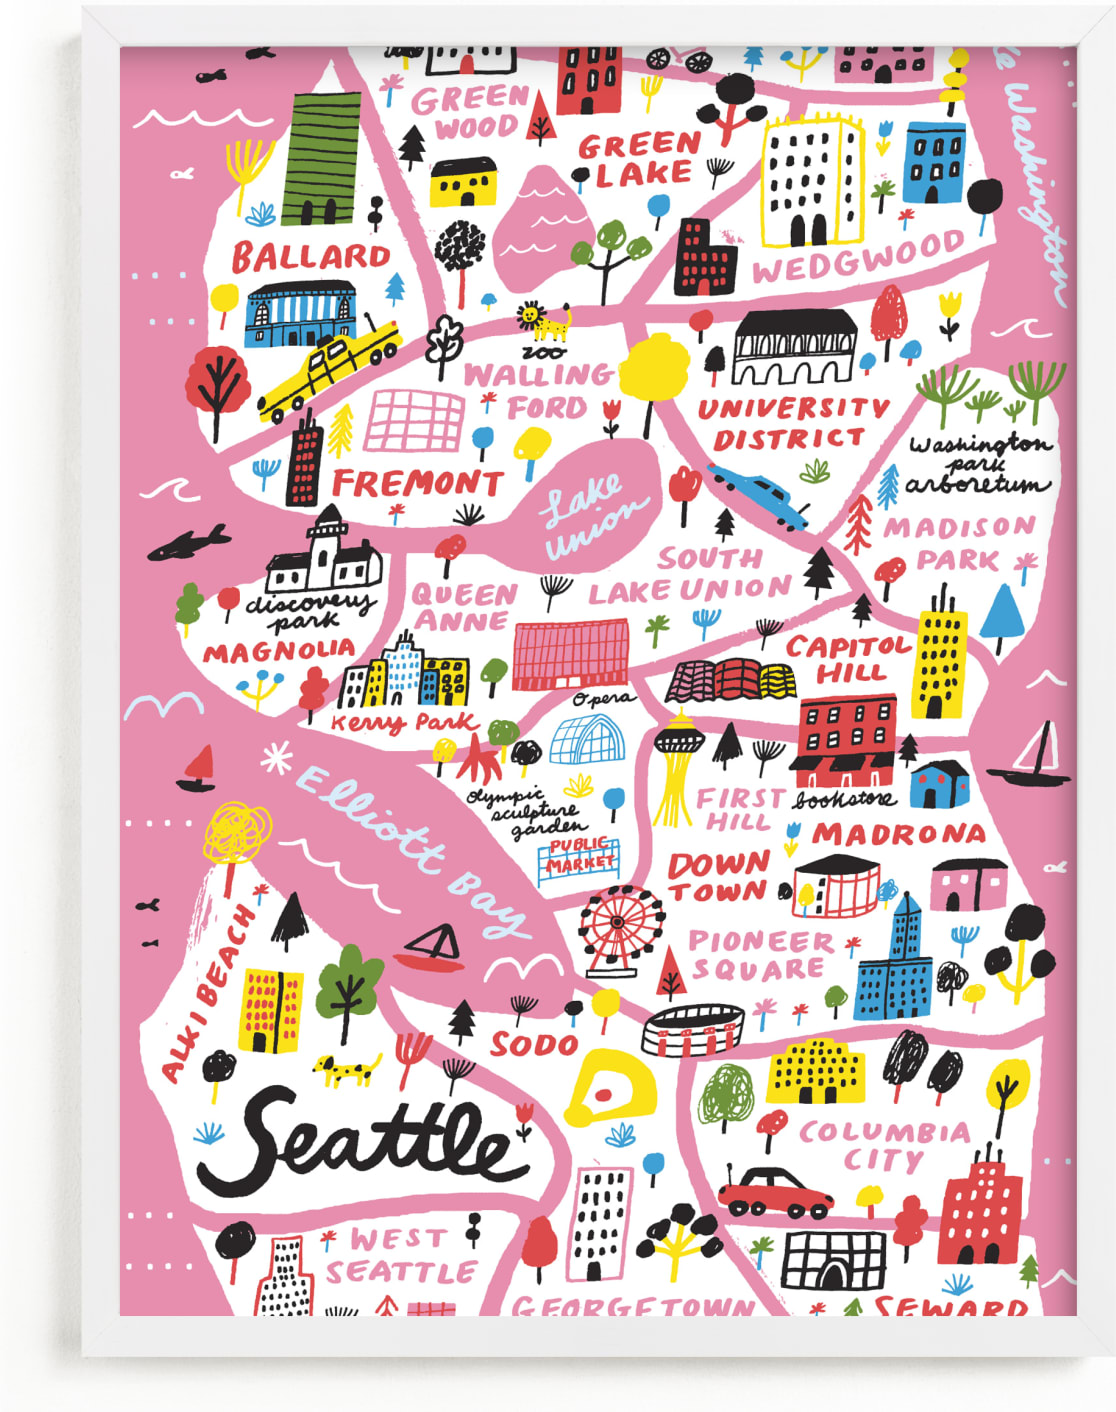 This is a colorful art by Jordan Sondler called I Love Seattle.